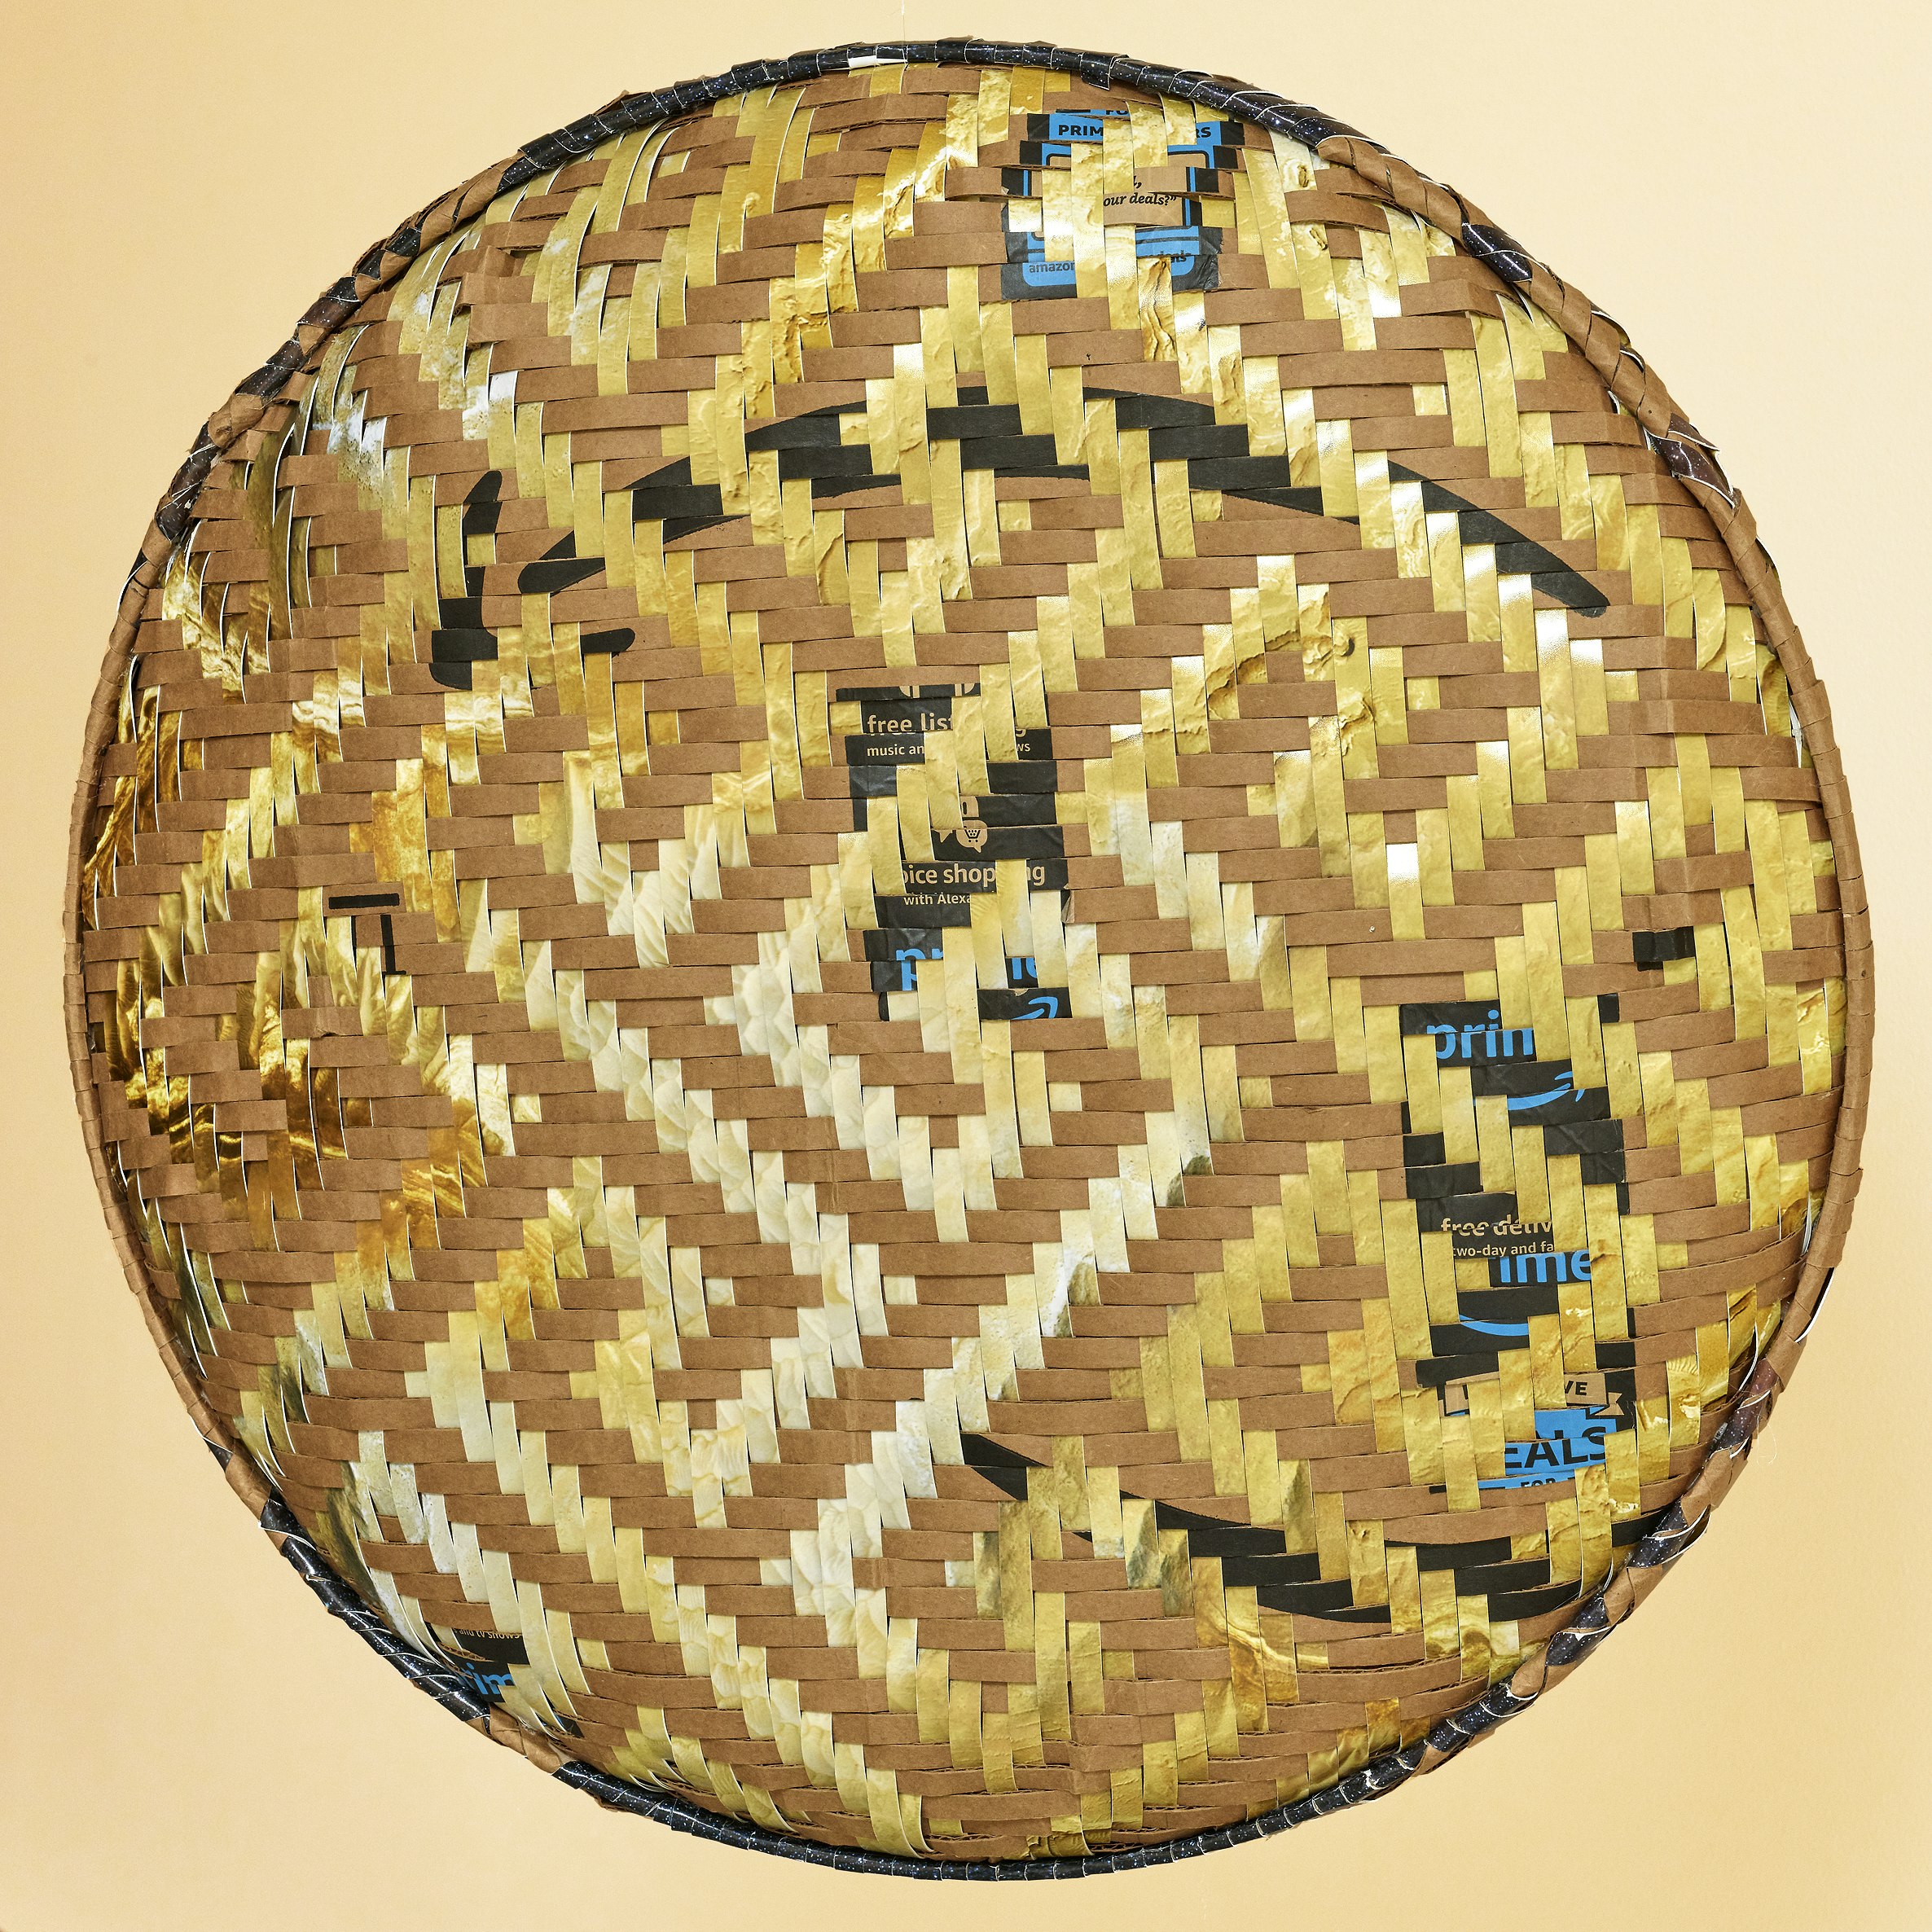 A woven basket created from Amazon.com boxes and archival inkjet prints on glossy photo paper